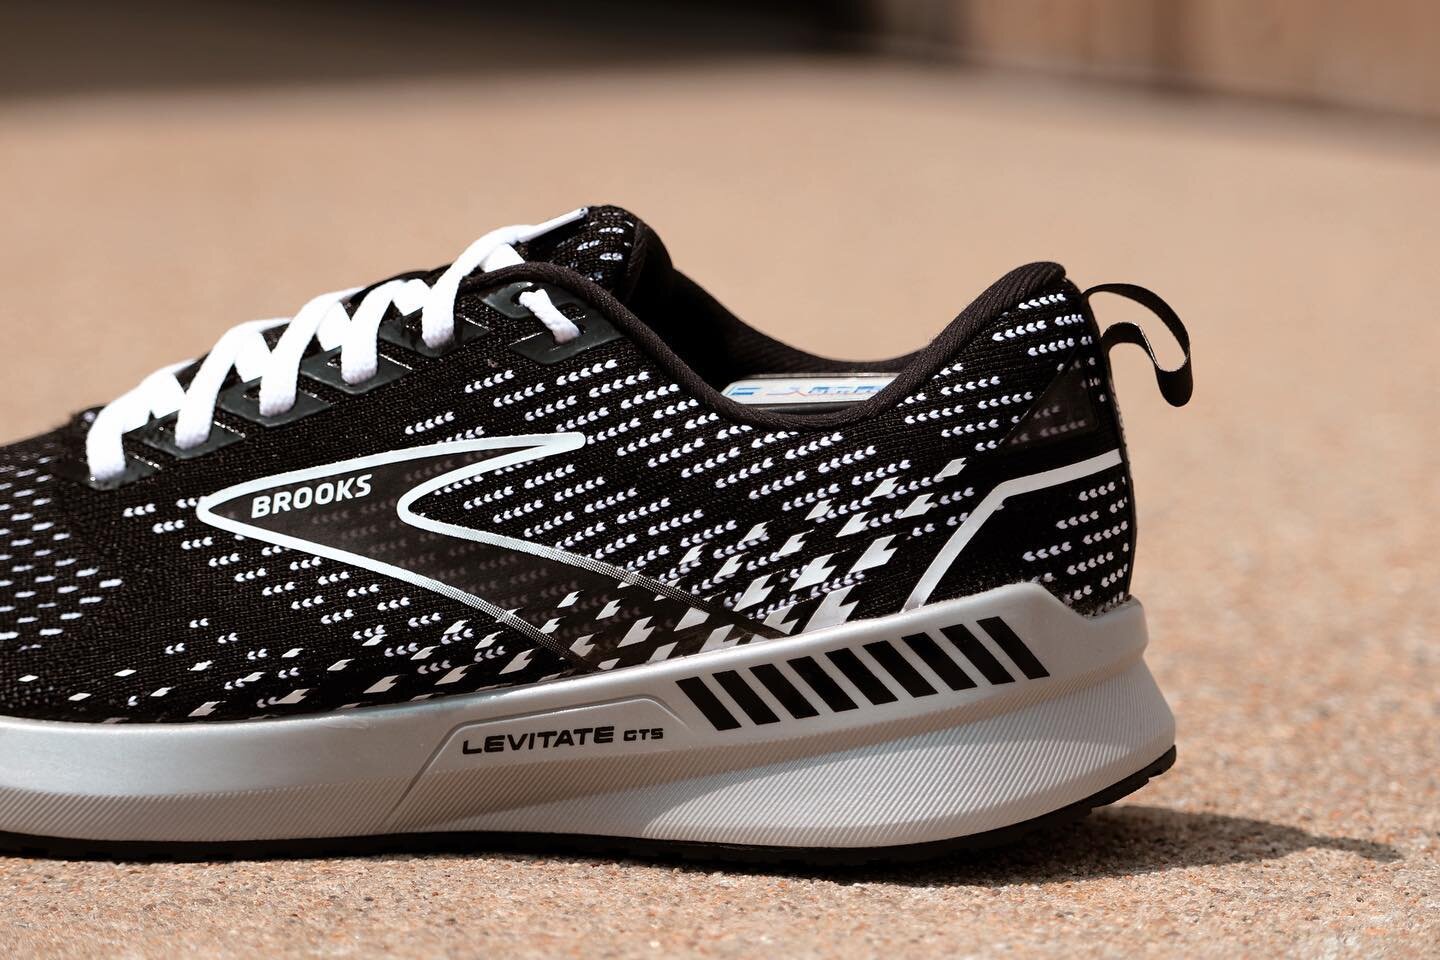 Women&rsquo;s shoe updates! 🏃&zwj;♀️
&bull;
New Levitate GTS 5!
The Levitate GTS has replaced the Bedlam. Same shoe, just updated name! 👟
&bull;
Also, the new Levitate 5 is in!
Heel collar is now back to like the original for all you OG Levitate lo